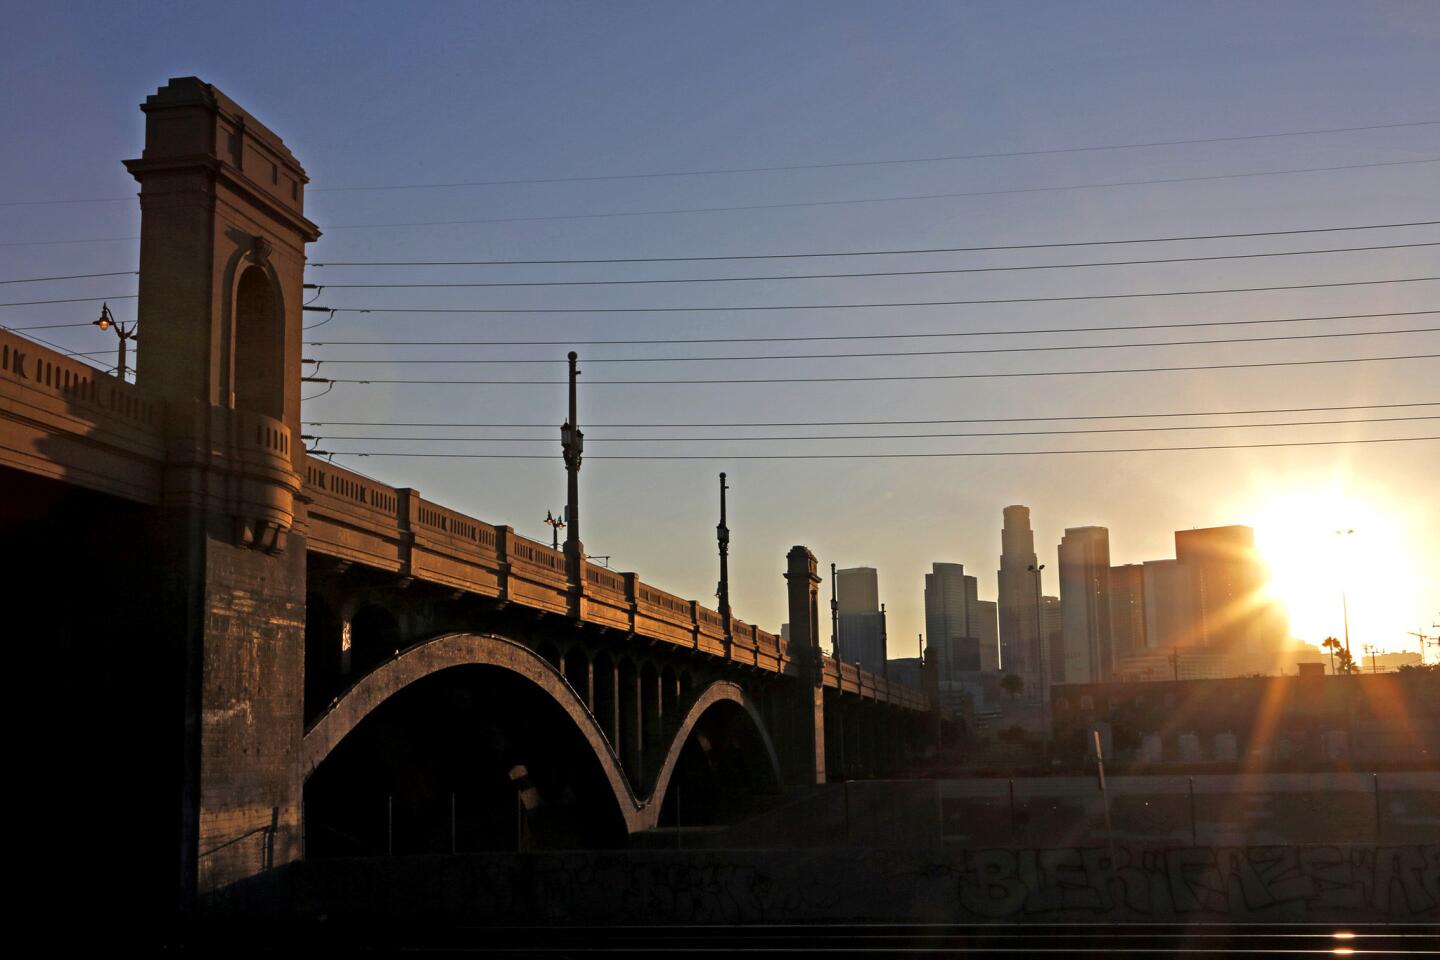 The First Street bridge, which connects downtown Los Angeles with Boyle Heights, was built in 1928 and displays plaques in memory of Henry G. Parker, an engineer who designed several bridges before his untimely death.